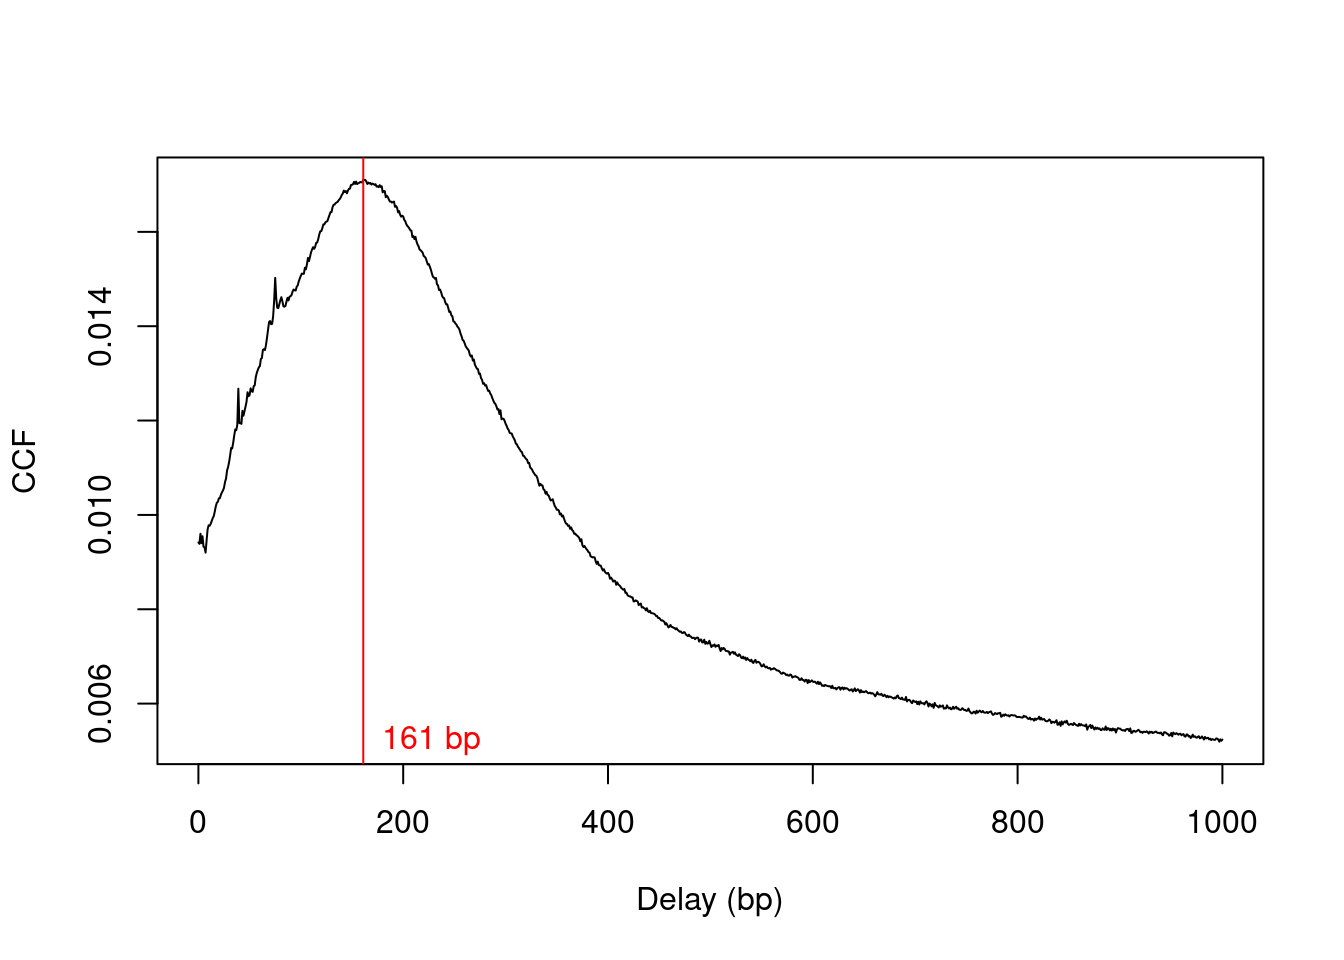 Cross-correlation function (CCF) against delay distance for the CBP dataset. The delay with the maximum correlation is shown as the red line.